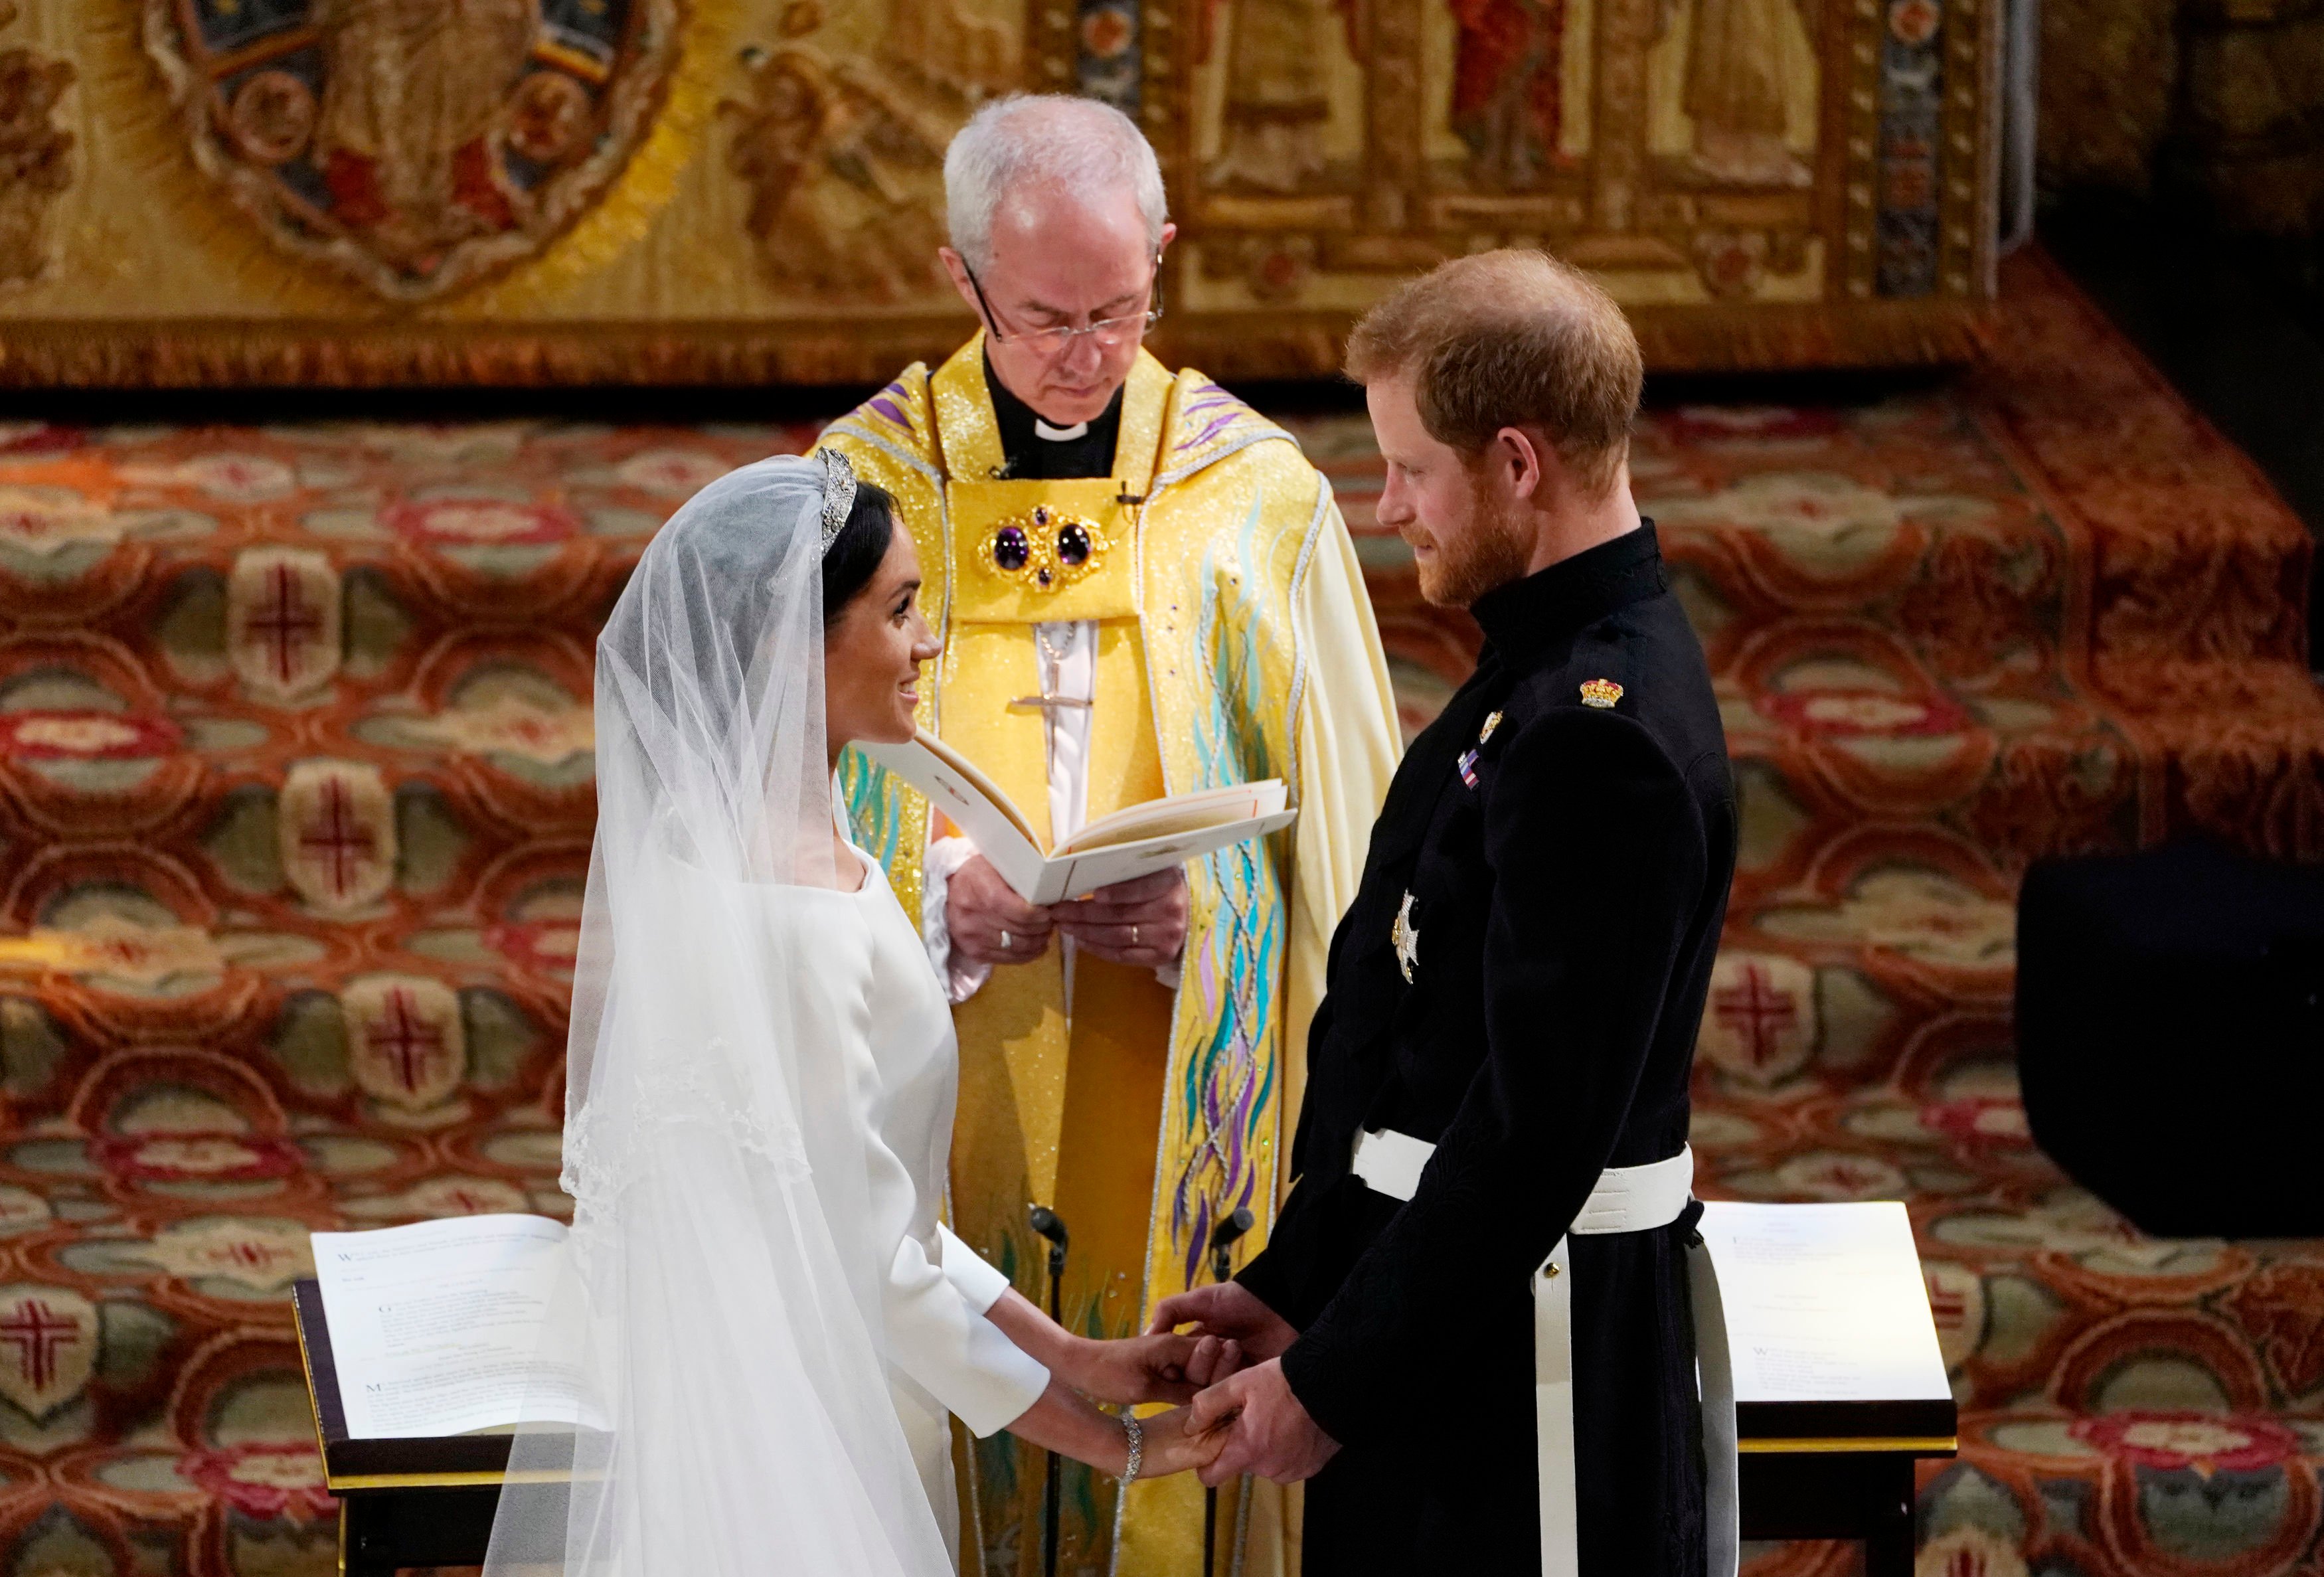 Prince Harry and Meghan Markle stand facing each other in front of Archbishop of Canterbury Justin Welby during wedding ceremony